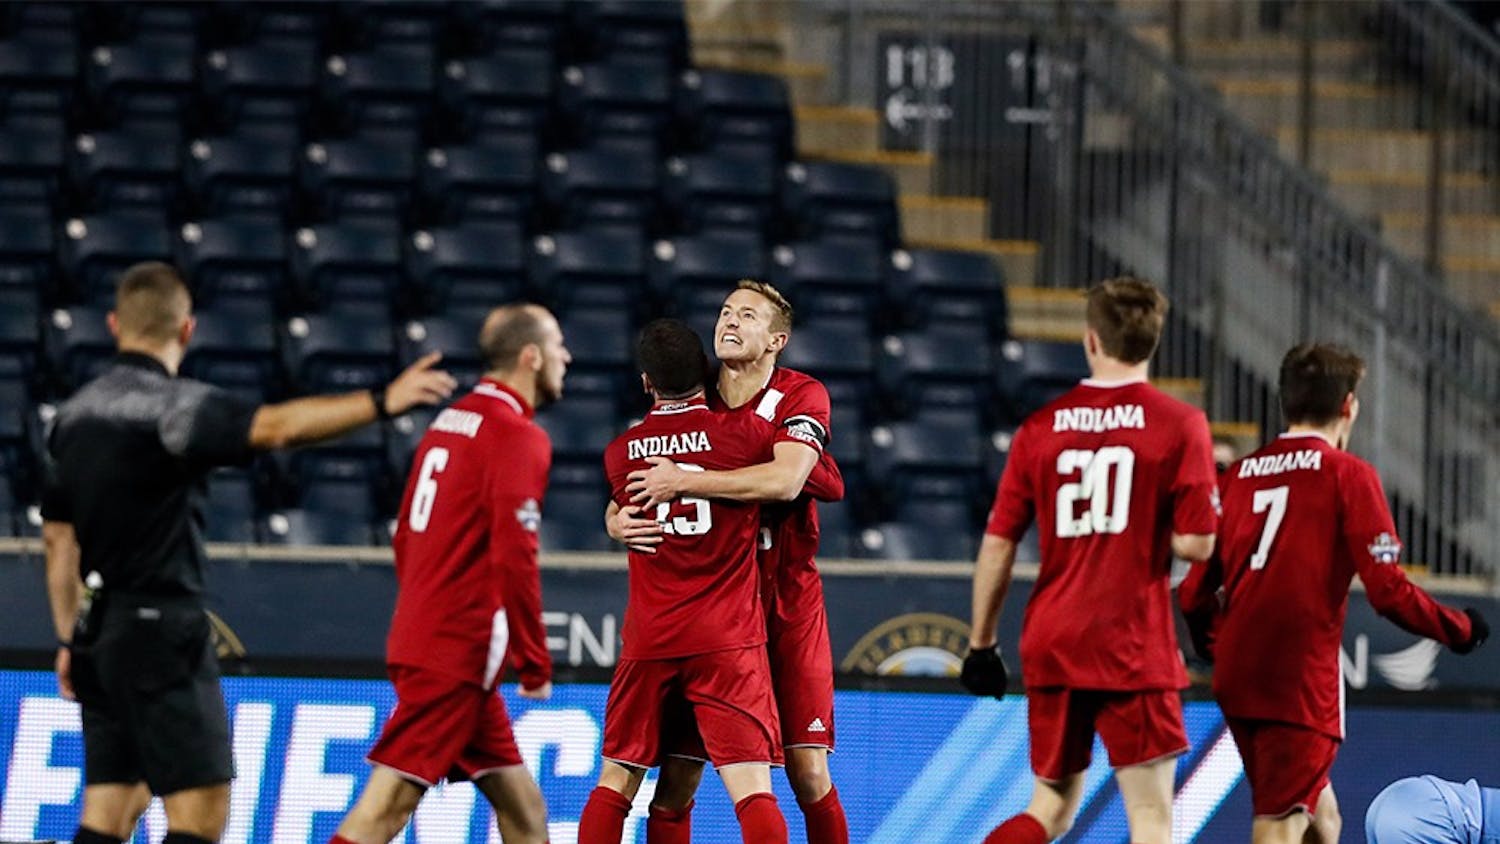 The Hoosiers celebrate after beating North Carolina 1-0 during the NCAA semifinal game on Dec. 8 at Talen Energy Stadium in Philadelphia. IU went on to suffer it's only loss of the year to Stanford in the National Title game 1-0.